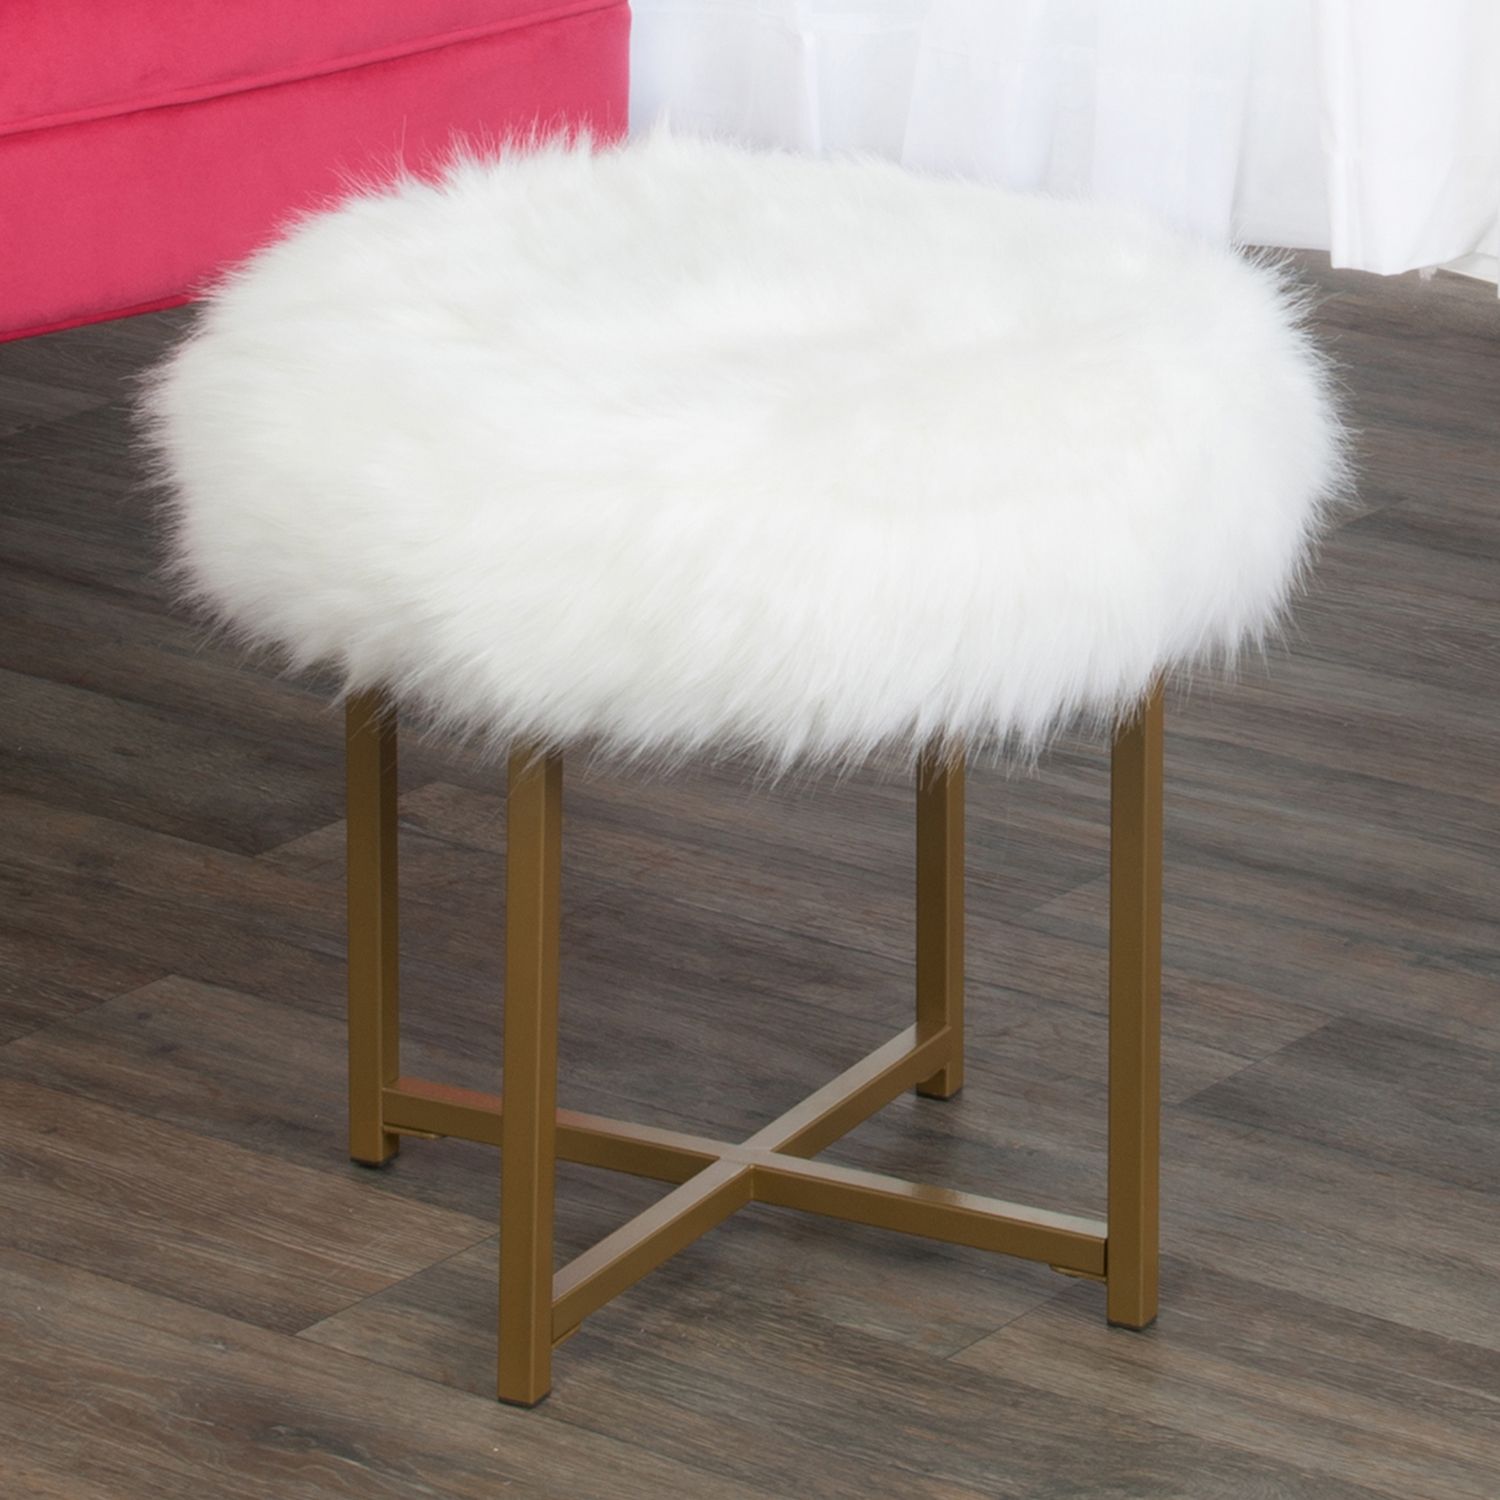 Image for HomePop Round Faux-Fur Stool End Table at Kohl's.